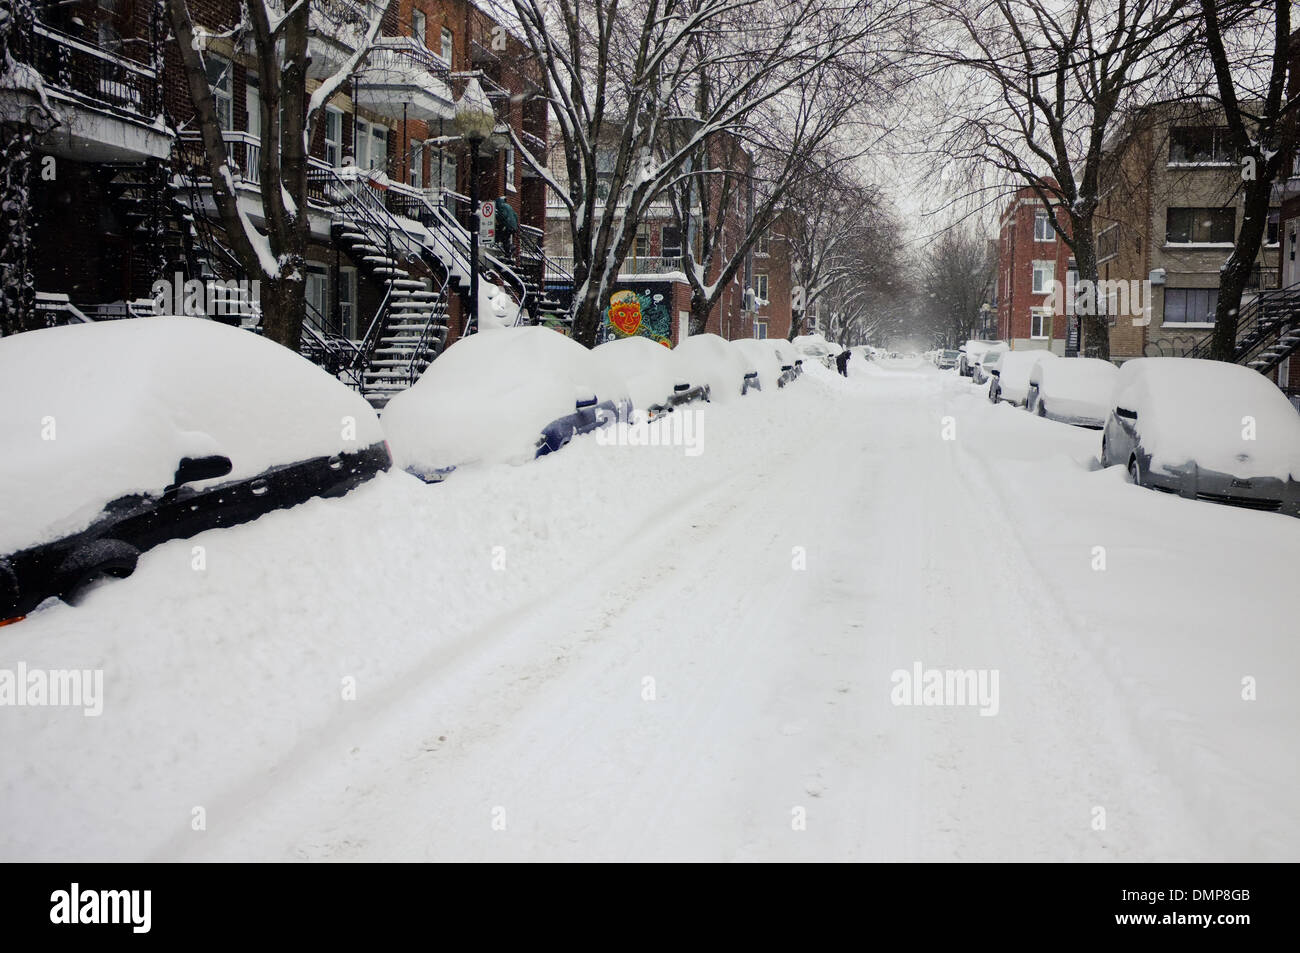 Cars covered in snow in the Plateau of Montreal, Quebec. Stock Photo